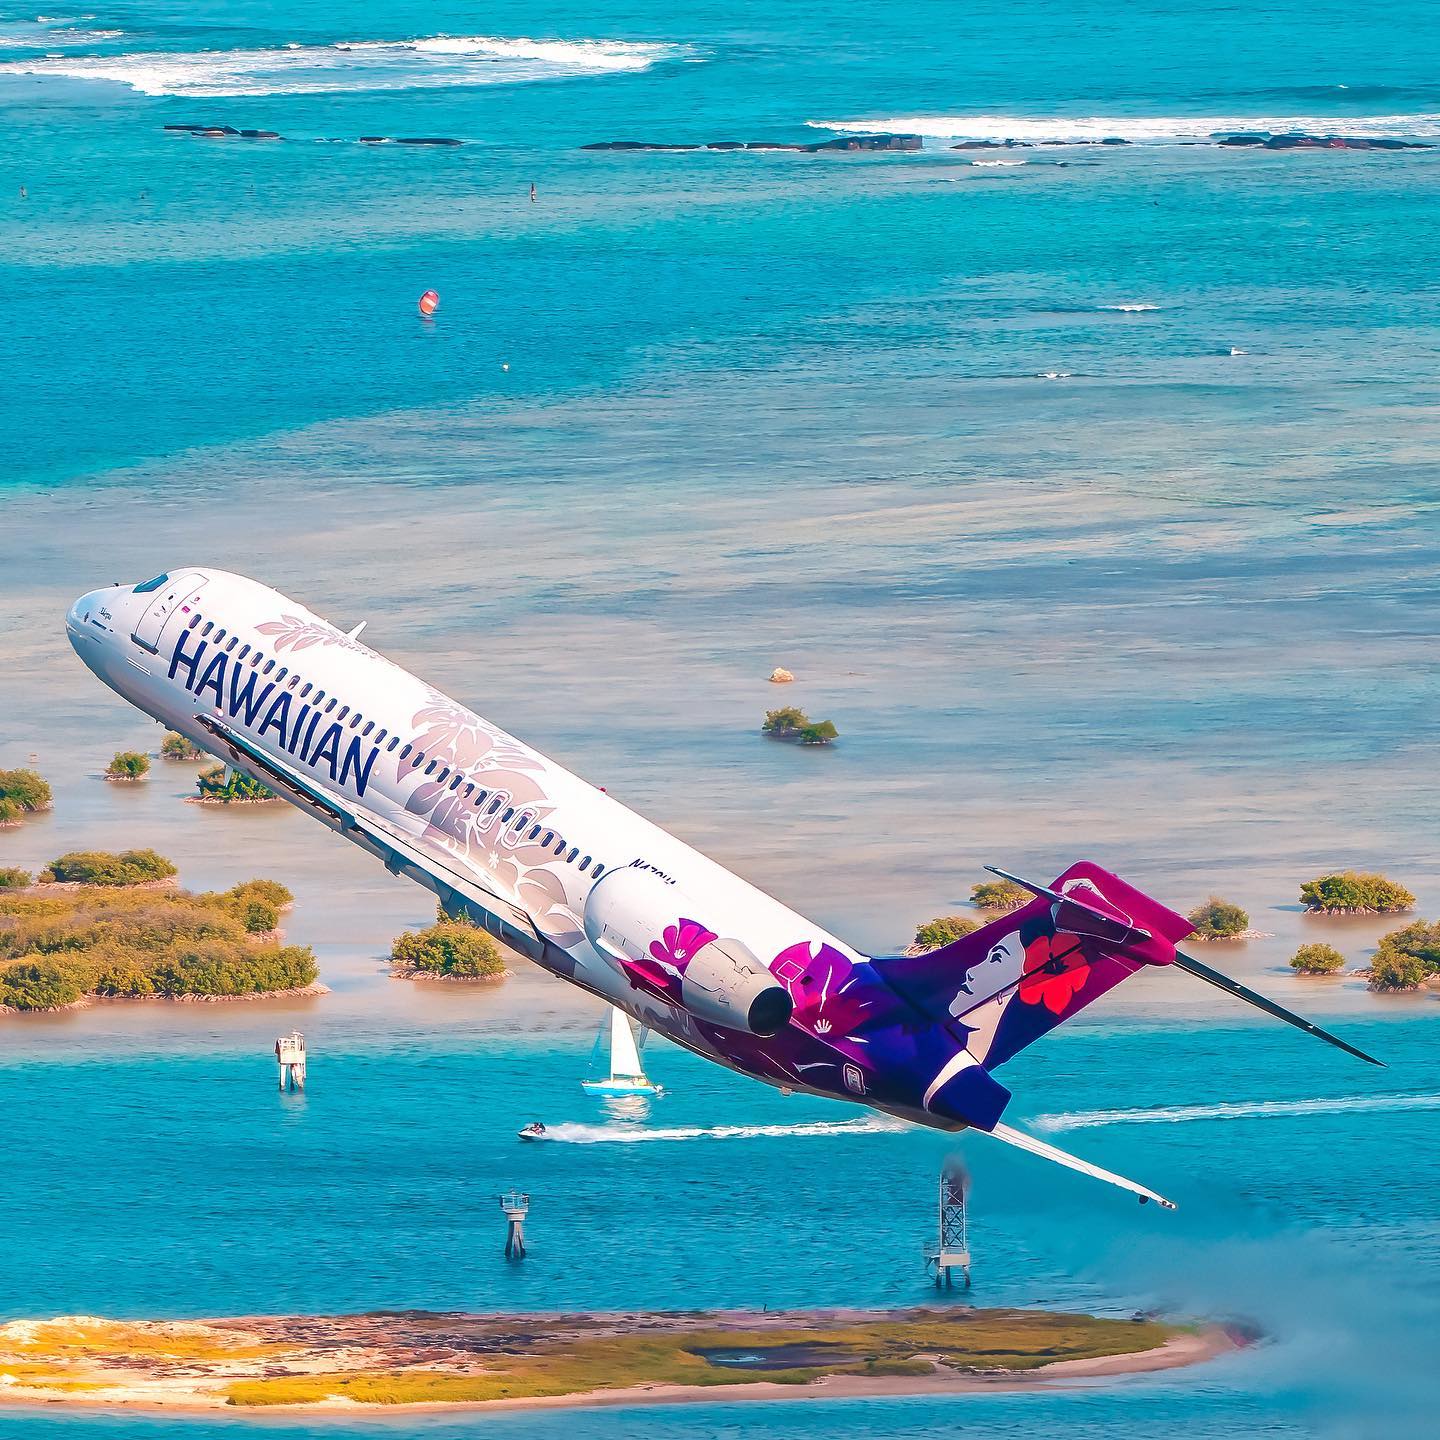 A plane departing from Honolulu to Maui. Photo by Instagram user @diecastryan